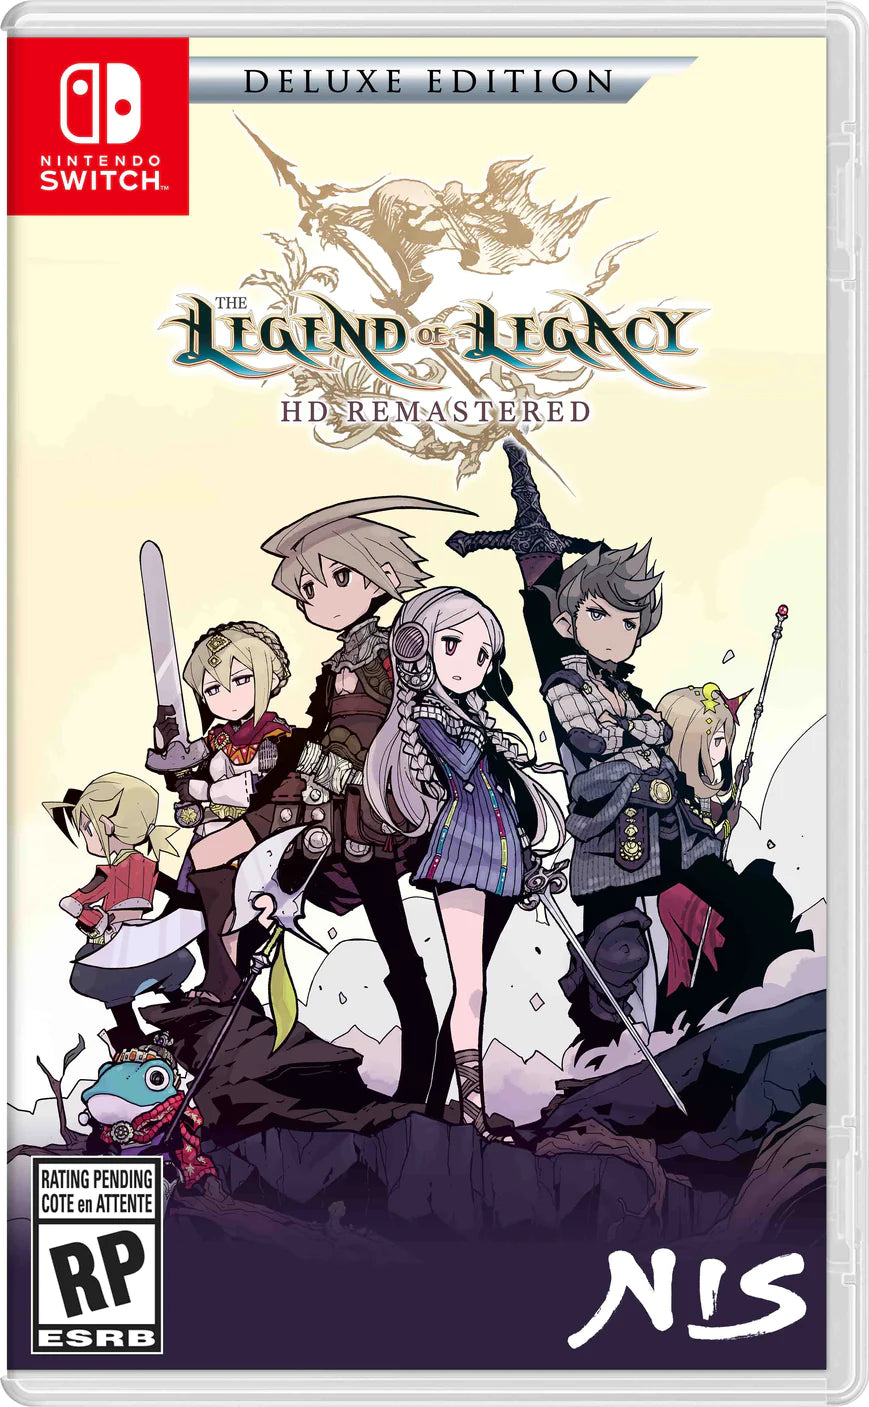 The Legend of Legacy HD Remastered (Deluxe Edition) [Switch]